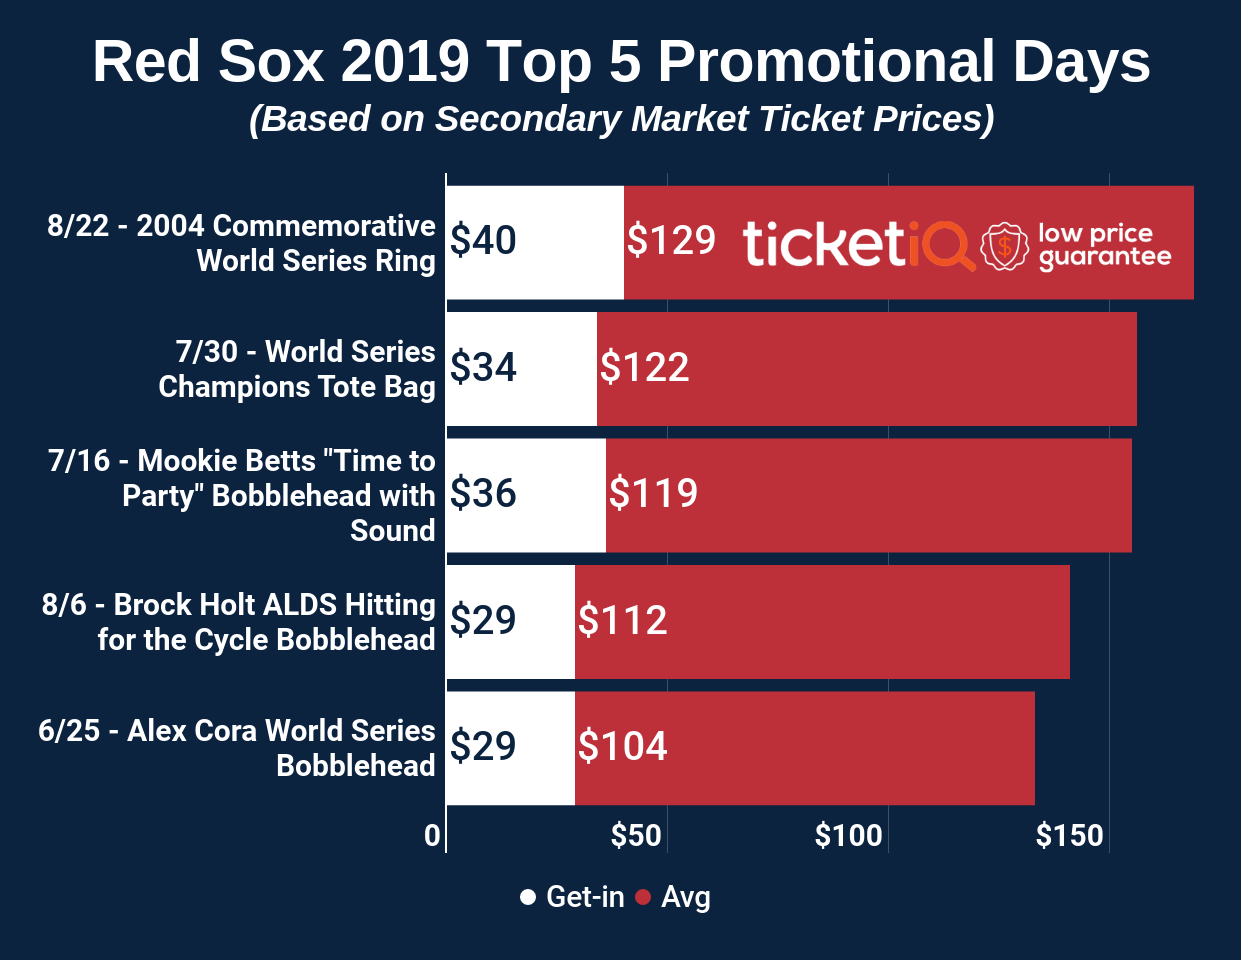 Red Sox promotions to watch out for this season